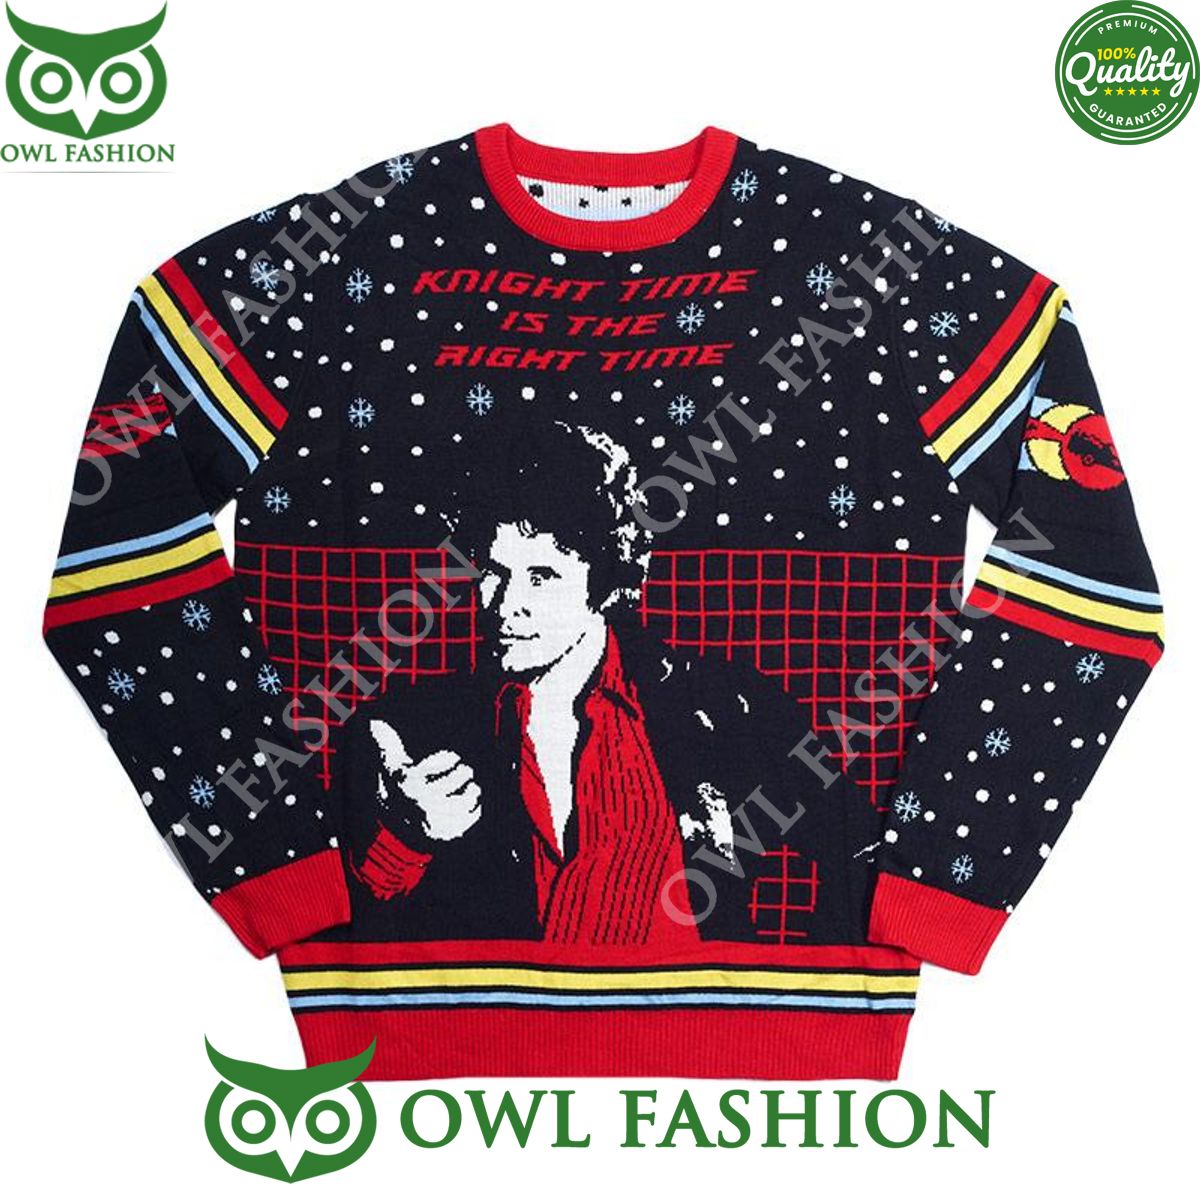 Knight Rider Knight Time Ugly Christmas Sweater Jumper Trending picture dear